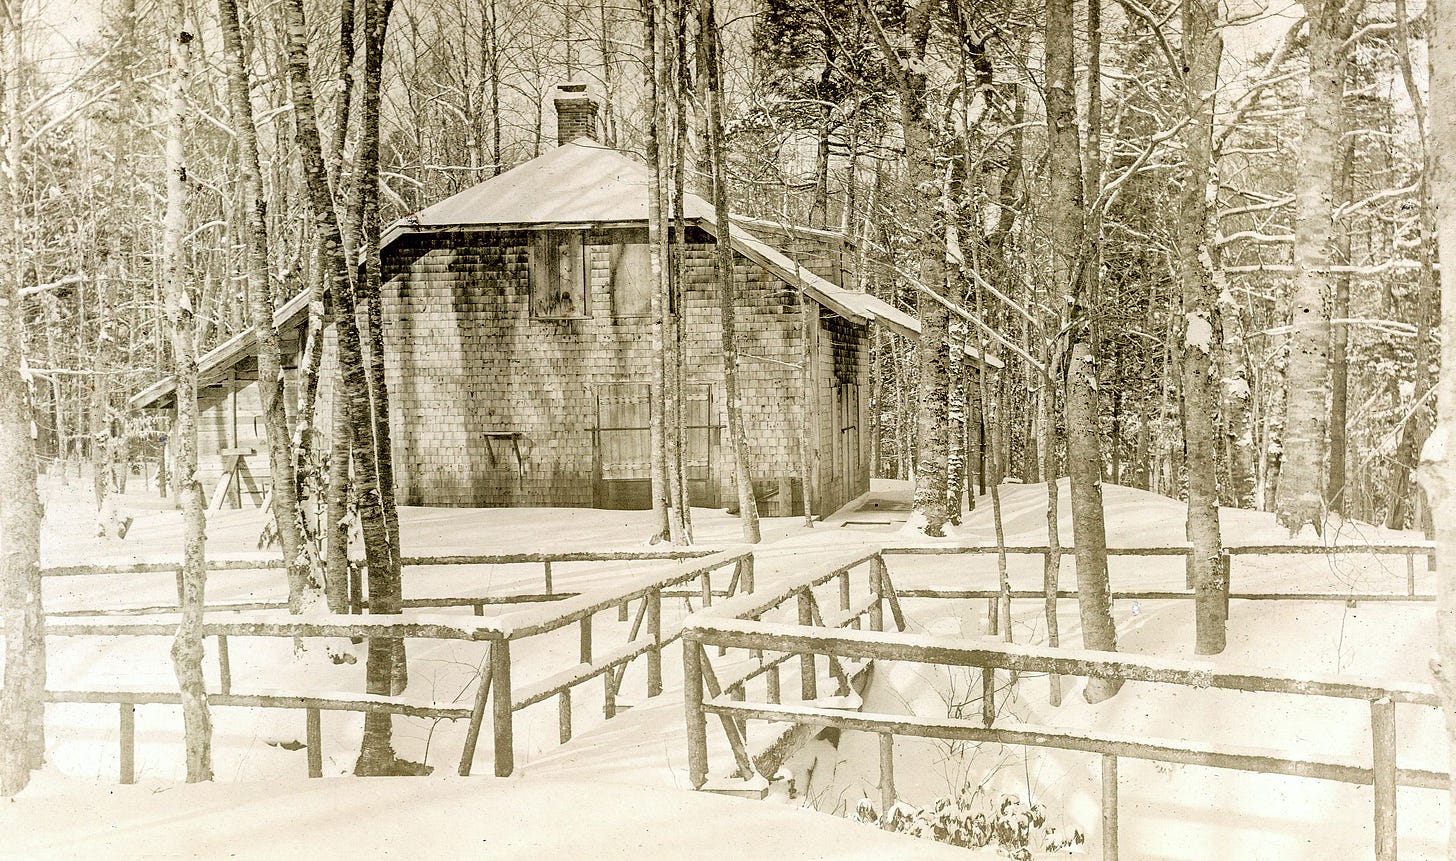 Bullard Camp in winter with snow cover